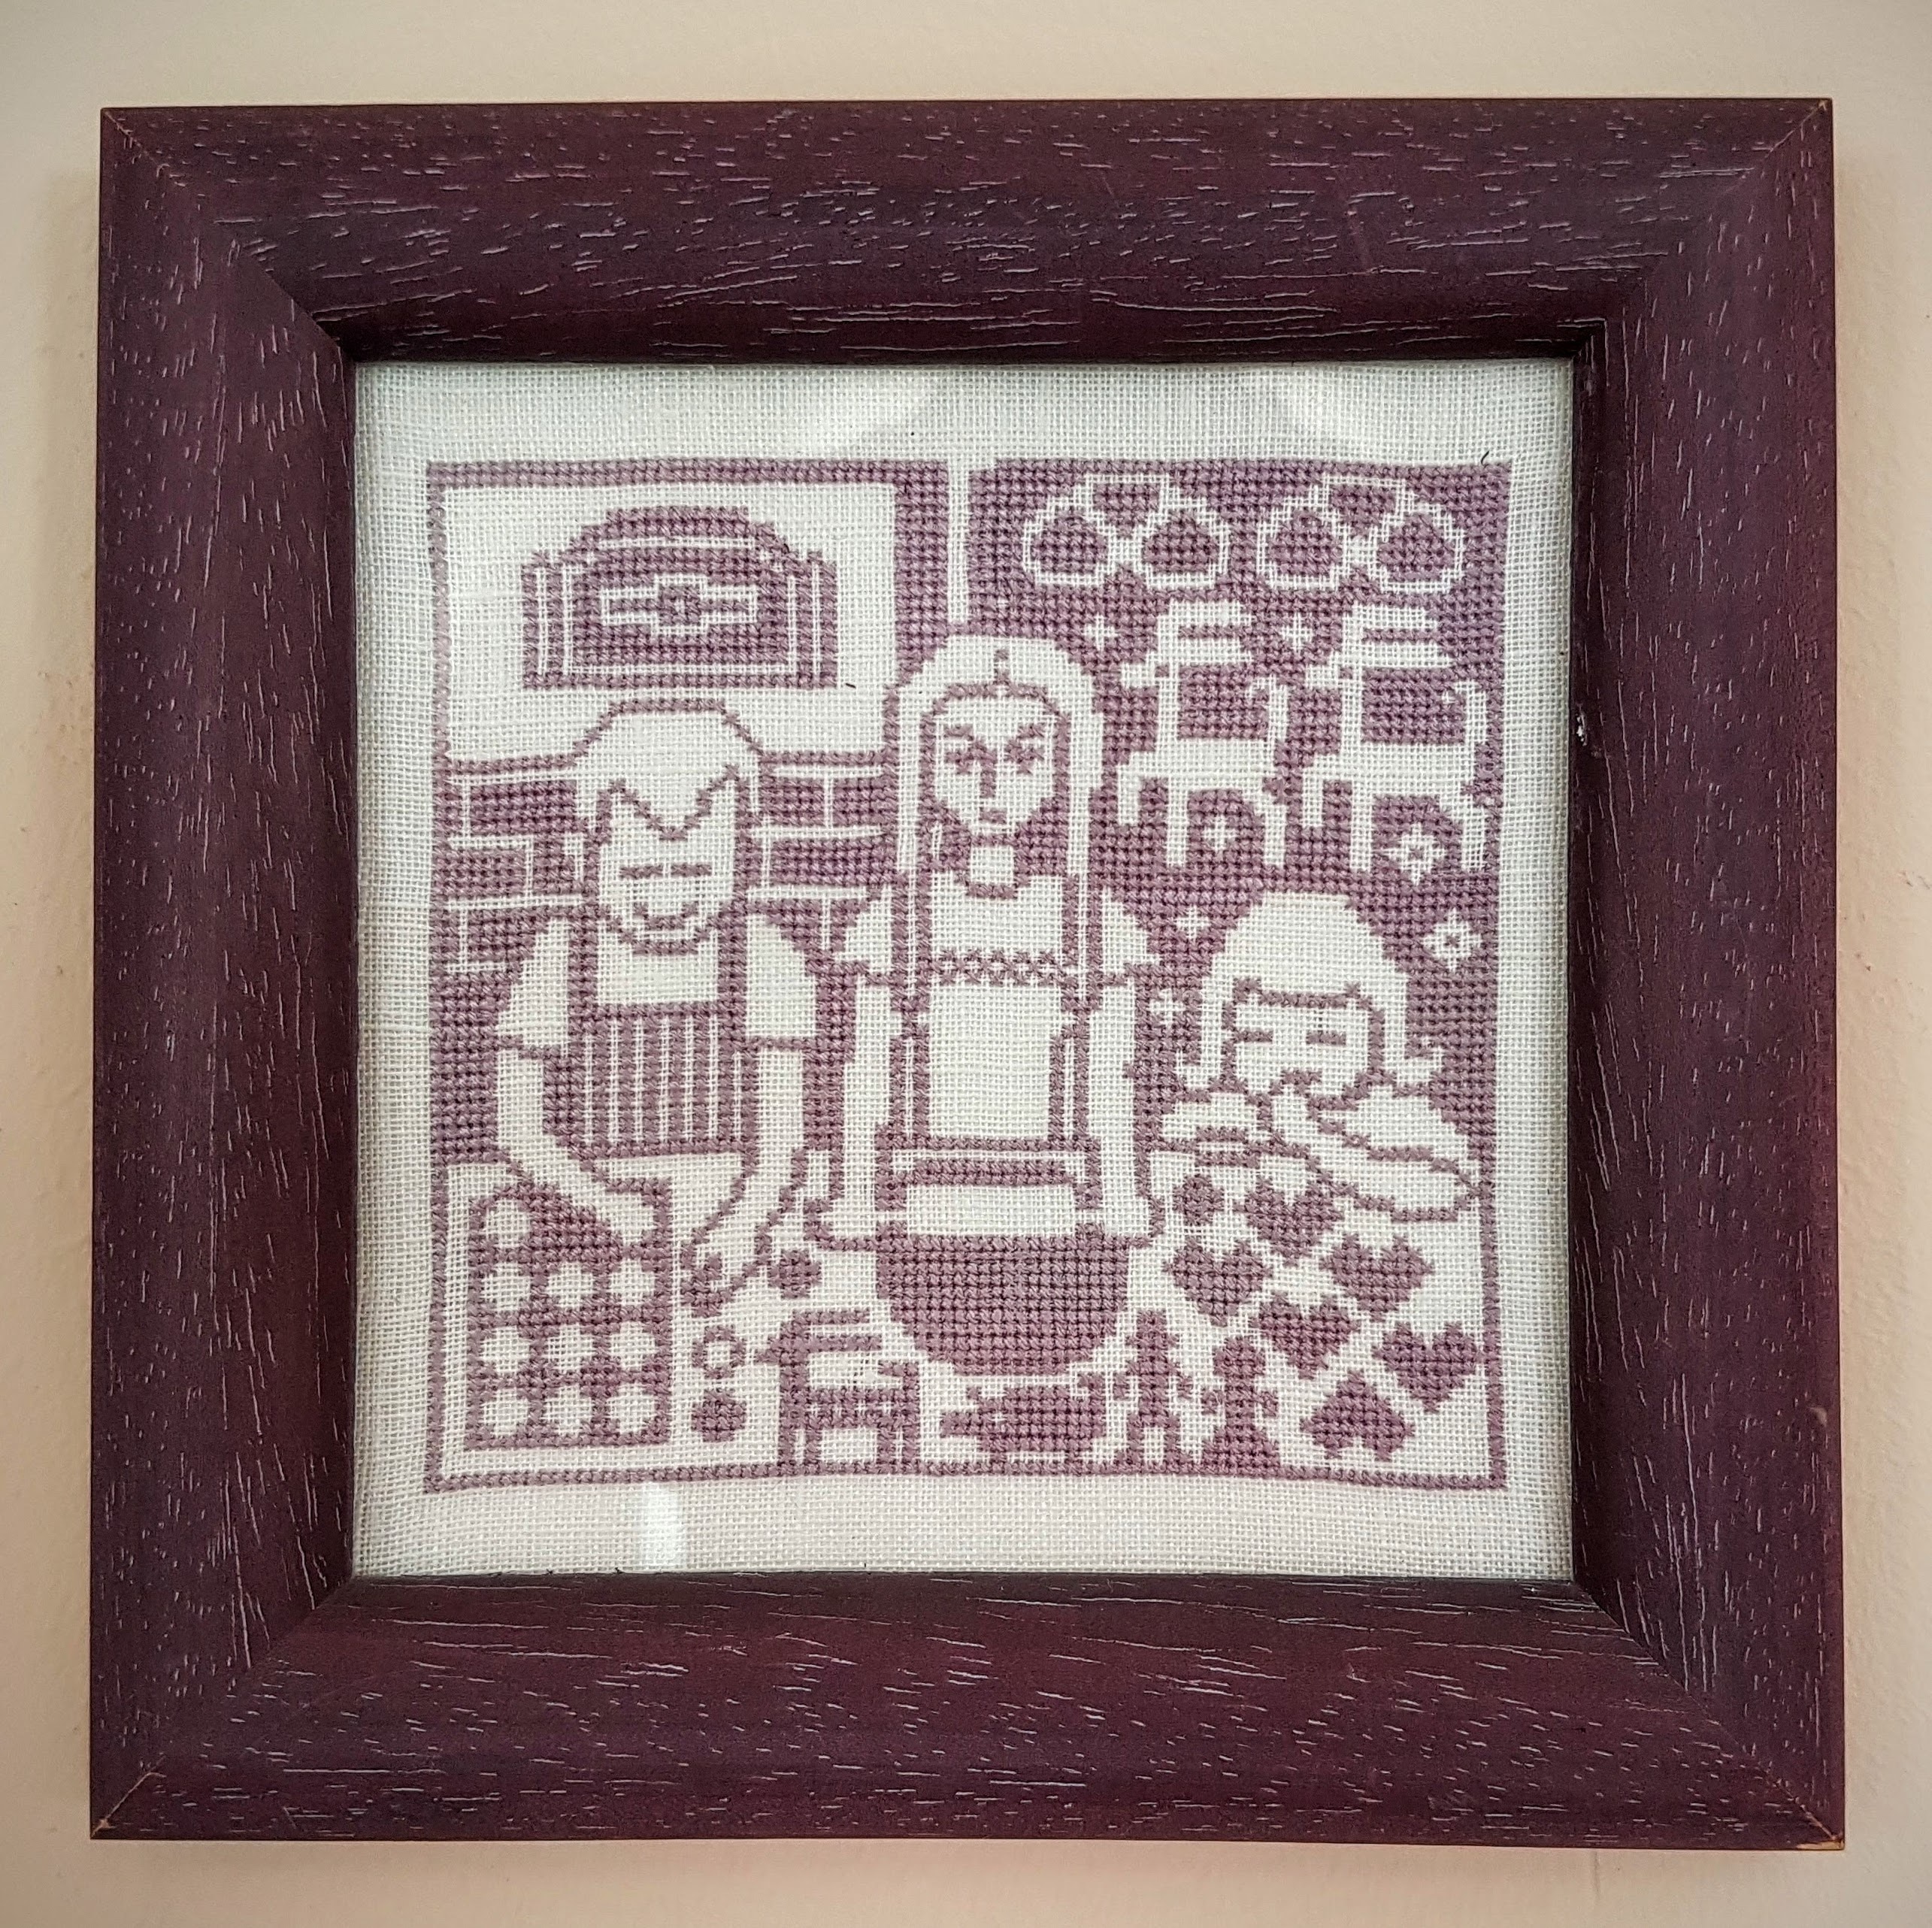 brown wooden framed knit textile and 3 person